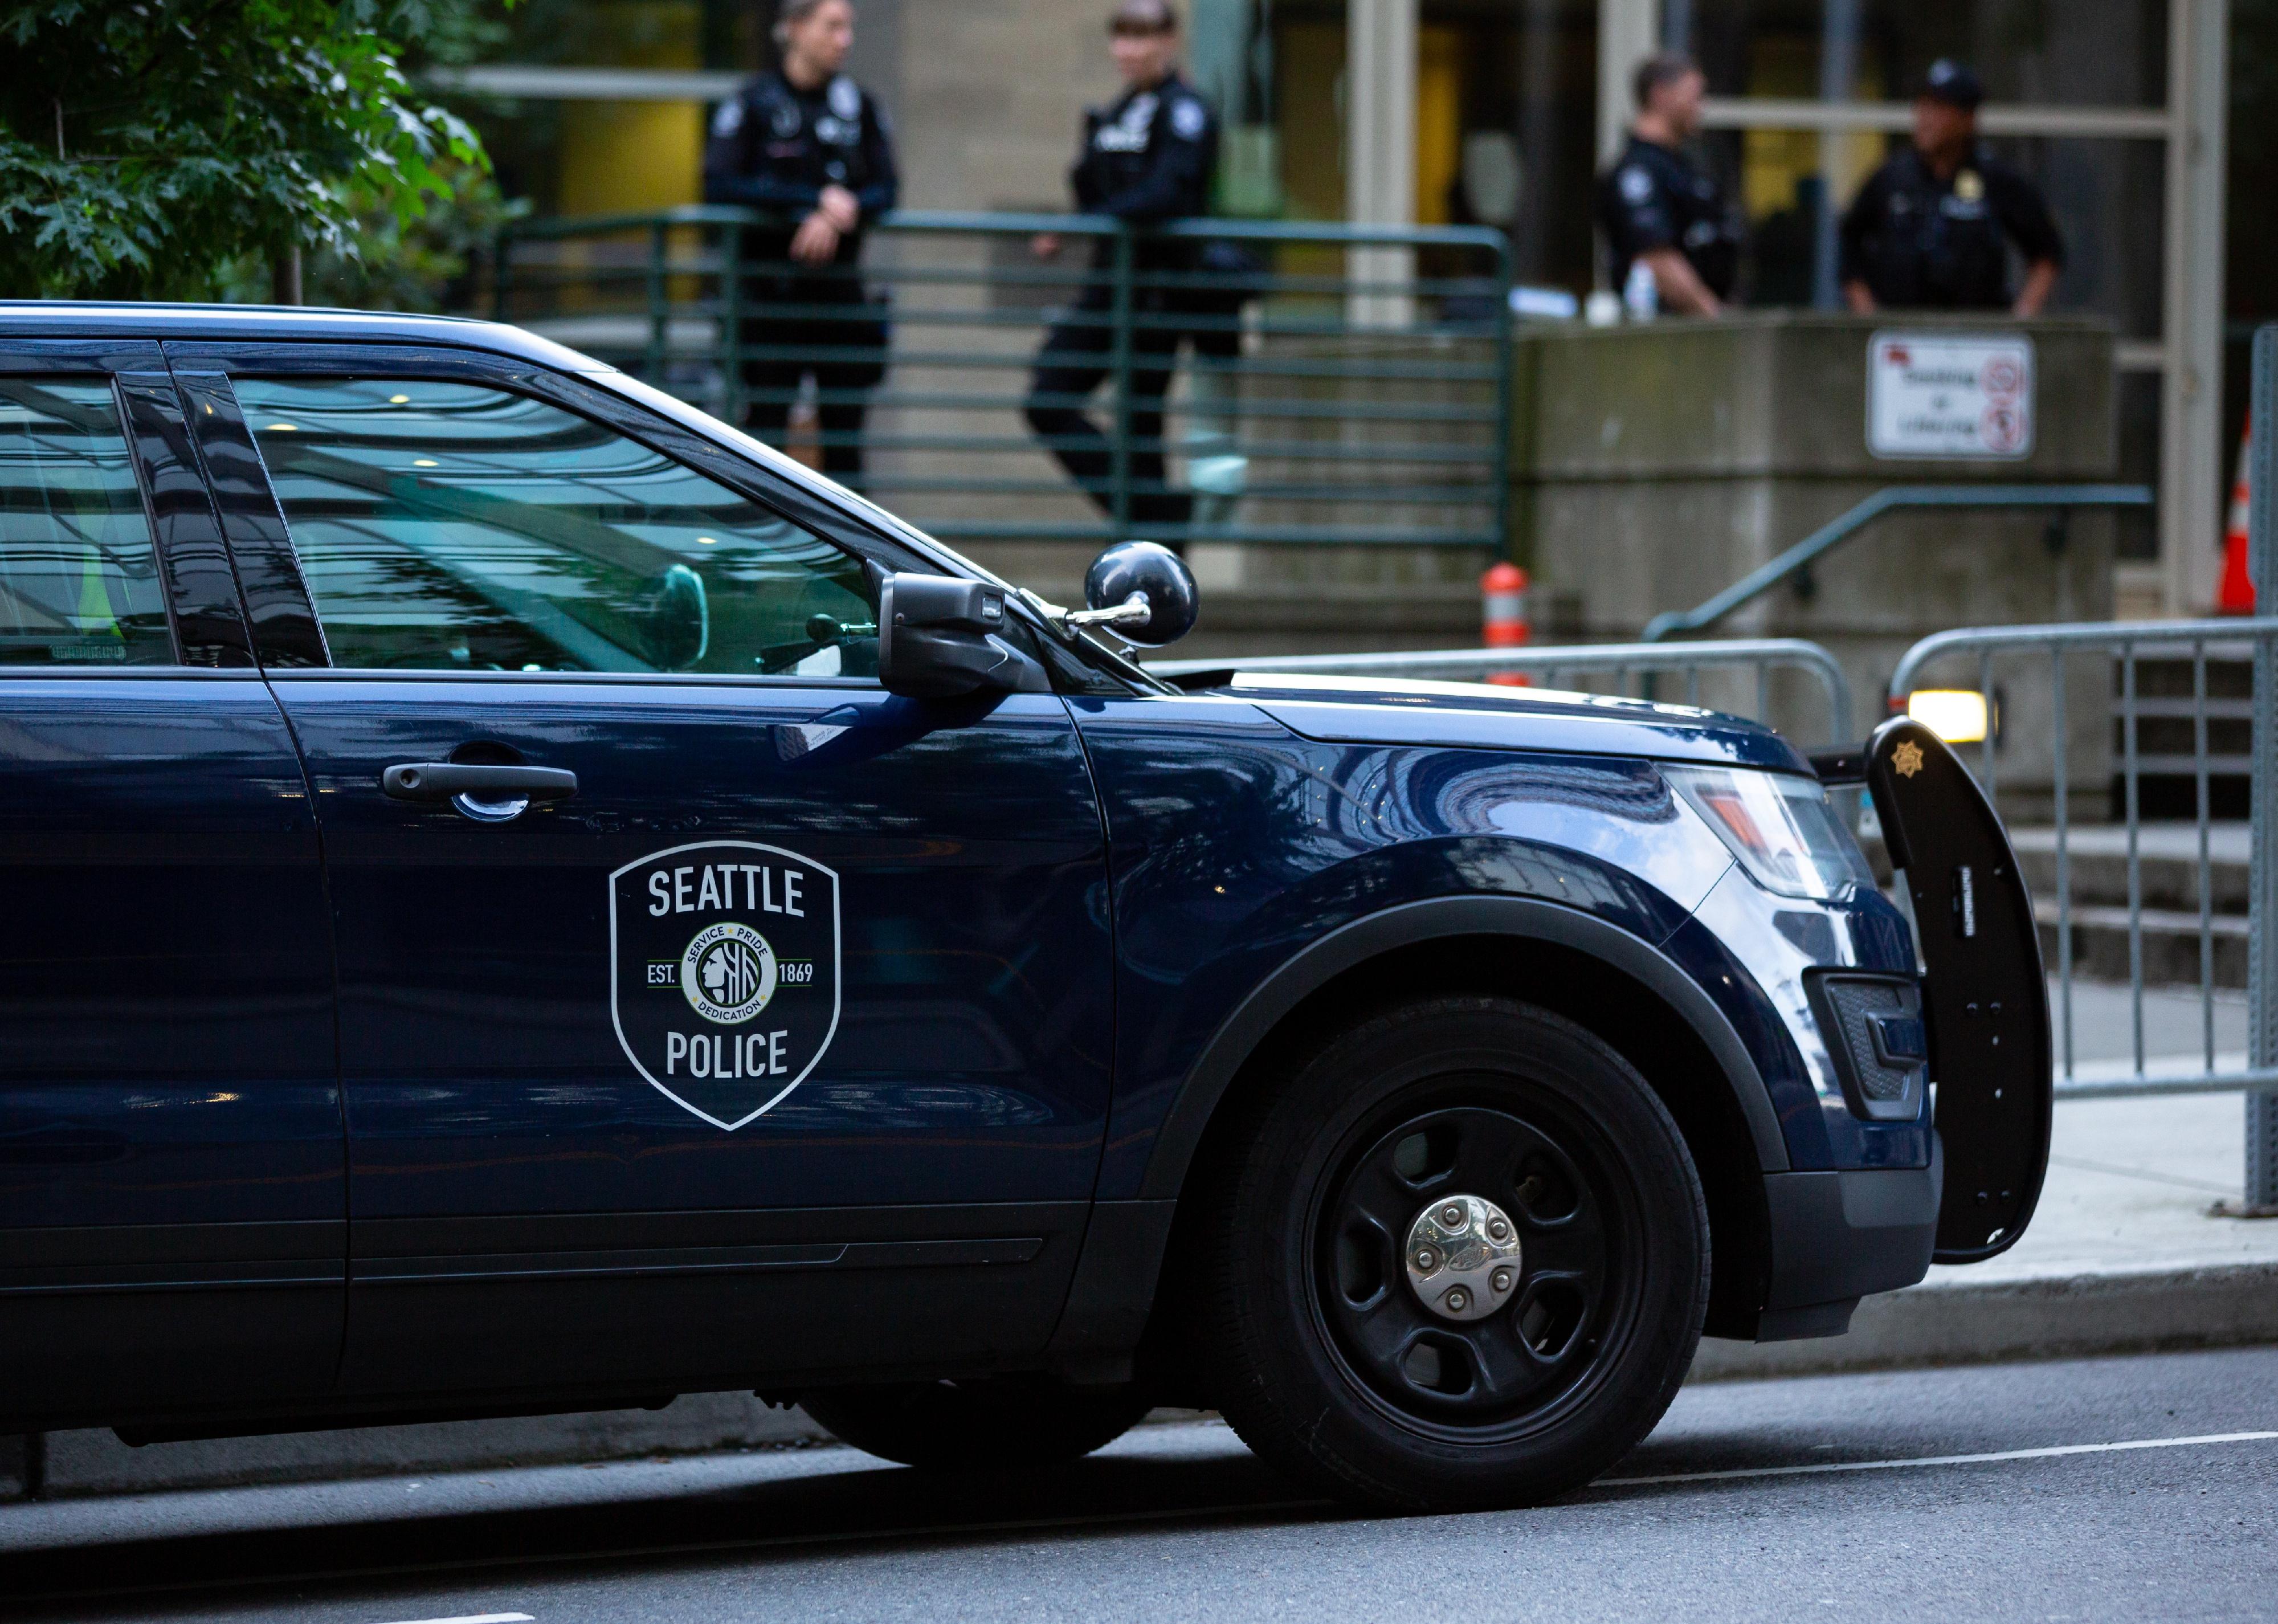 Squad car in front of the Seattle Police Department.